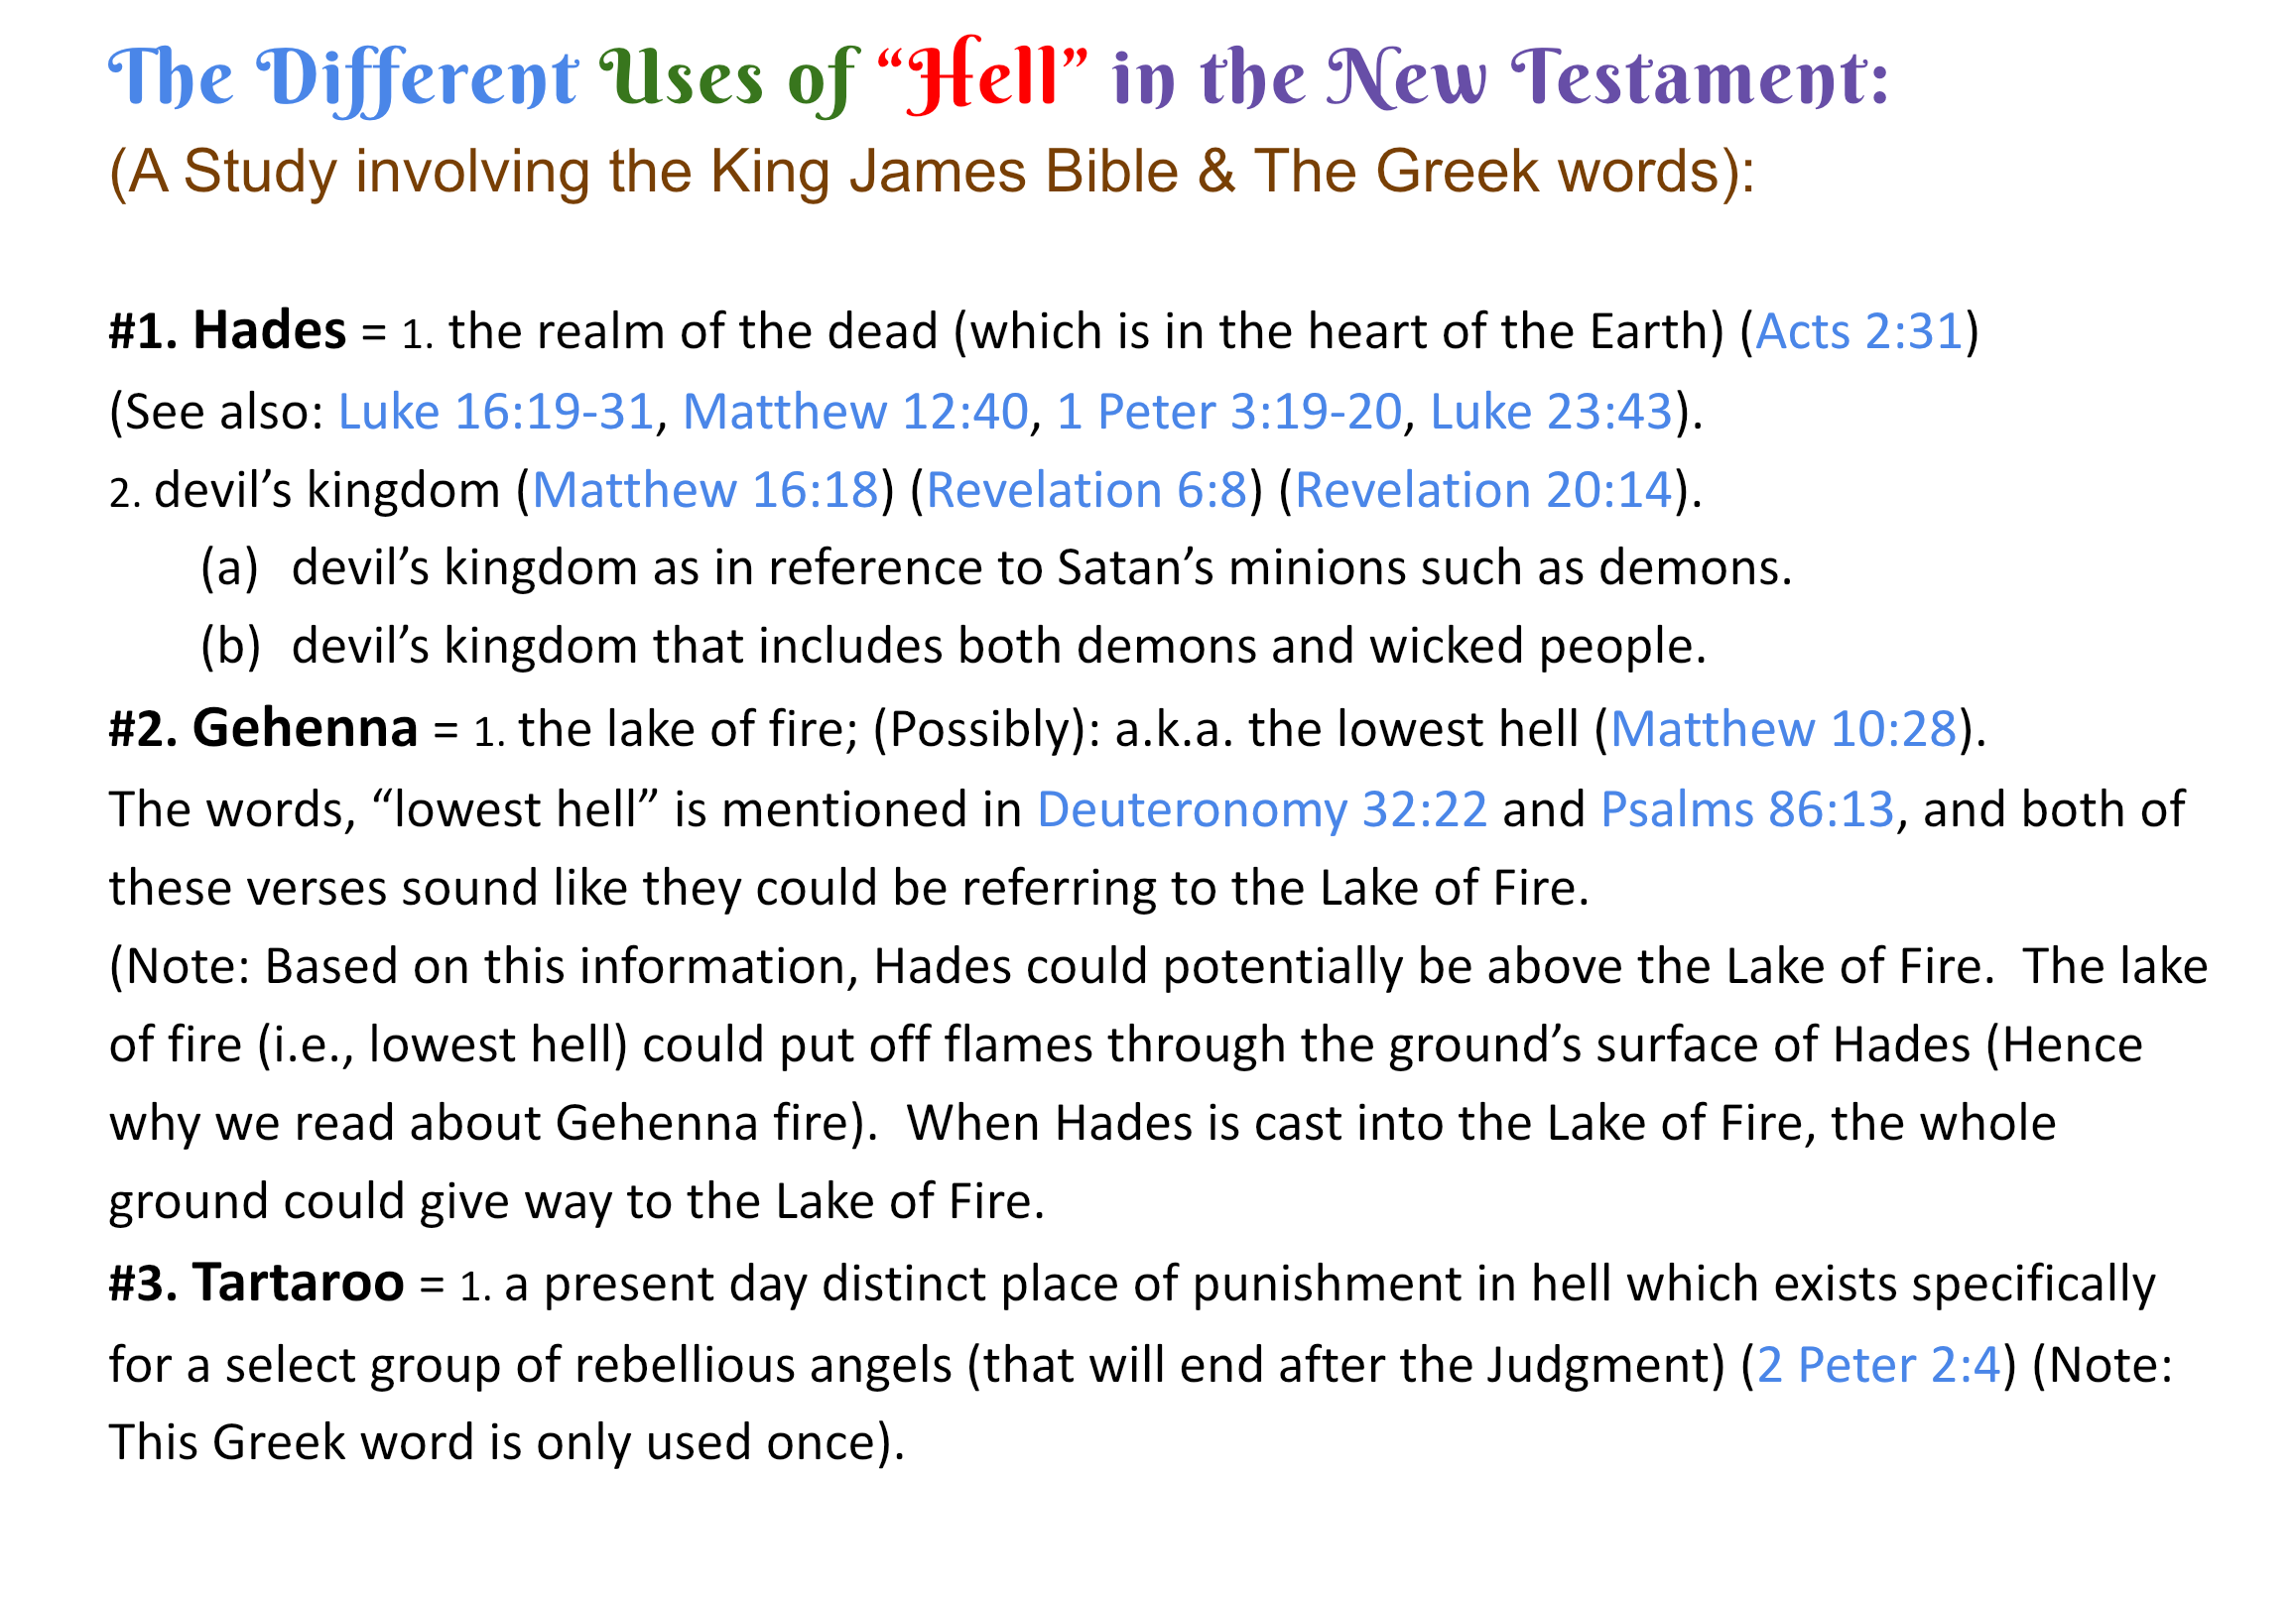 The word “Hell” and the Different Greek Words.